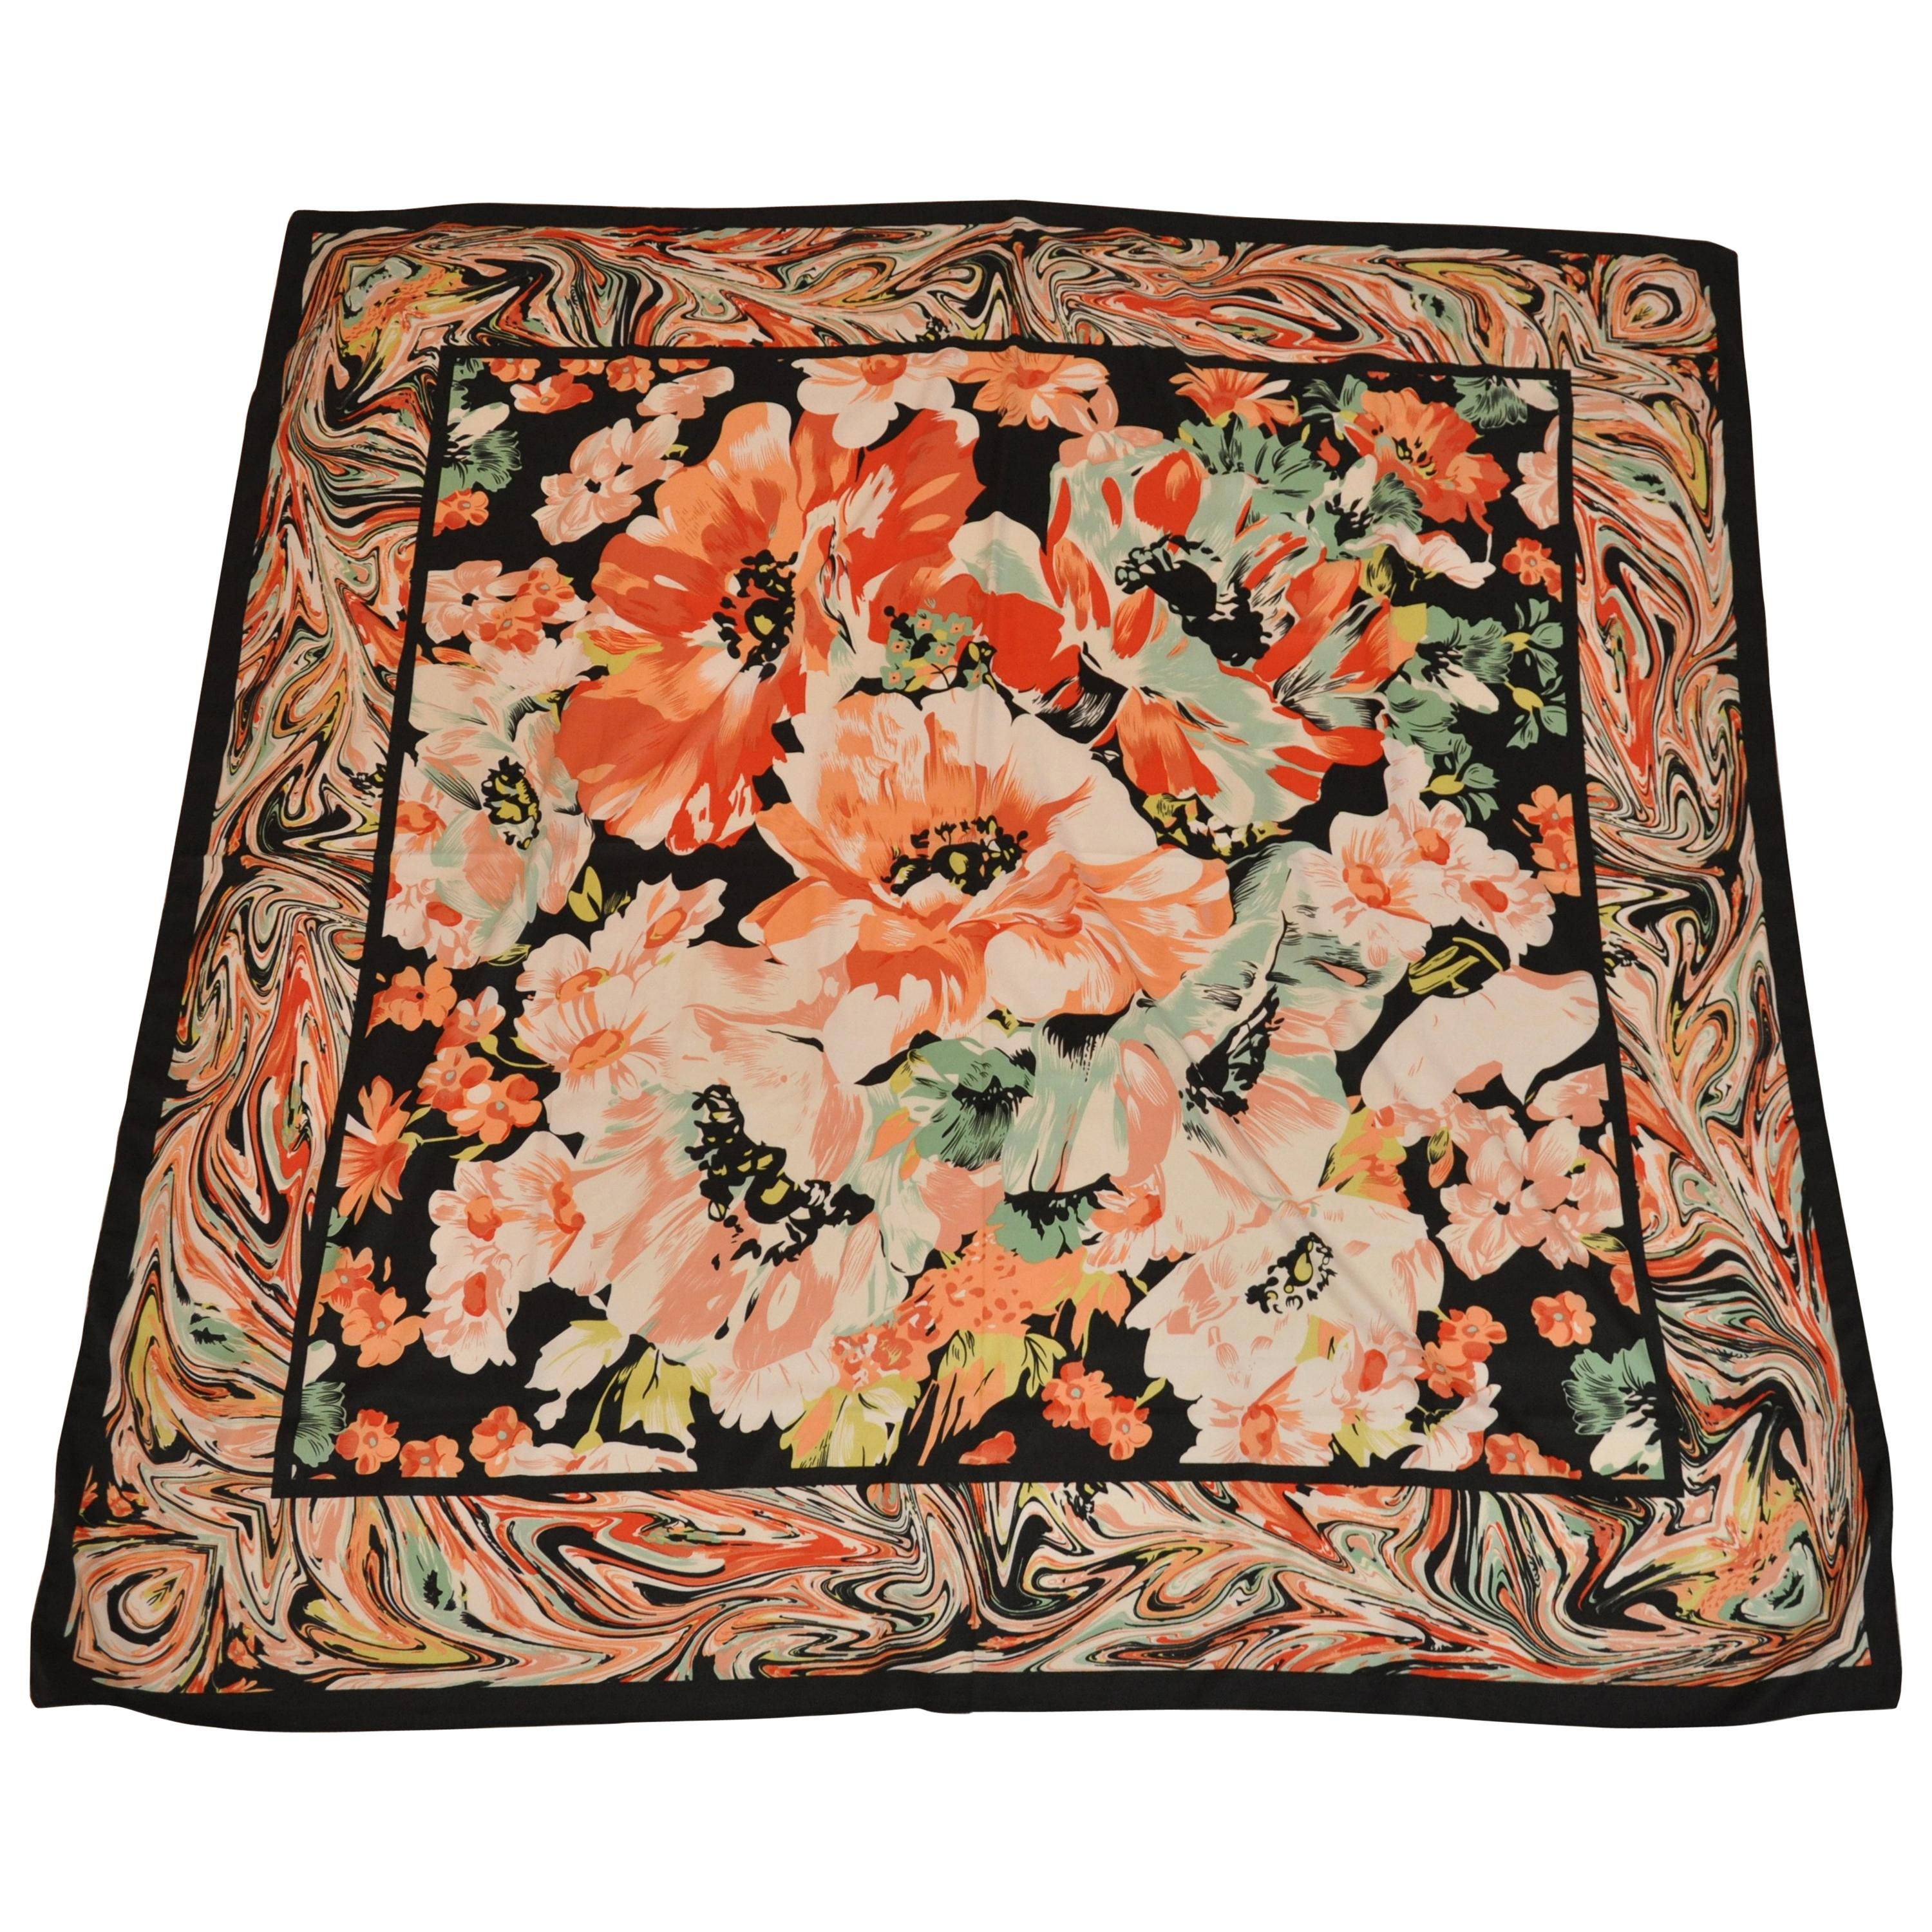 Echo Huge Majestic Bold "Burst of Autumn Florals" with Black Borders Scarf